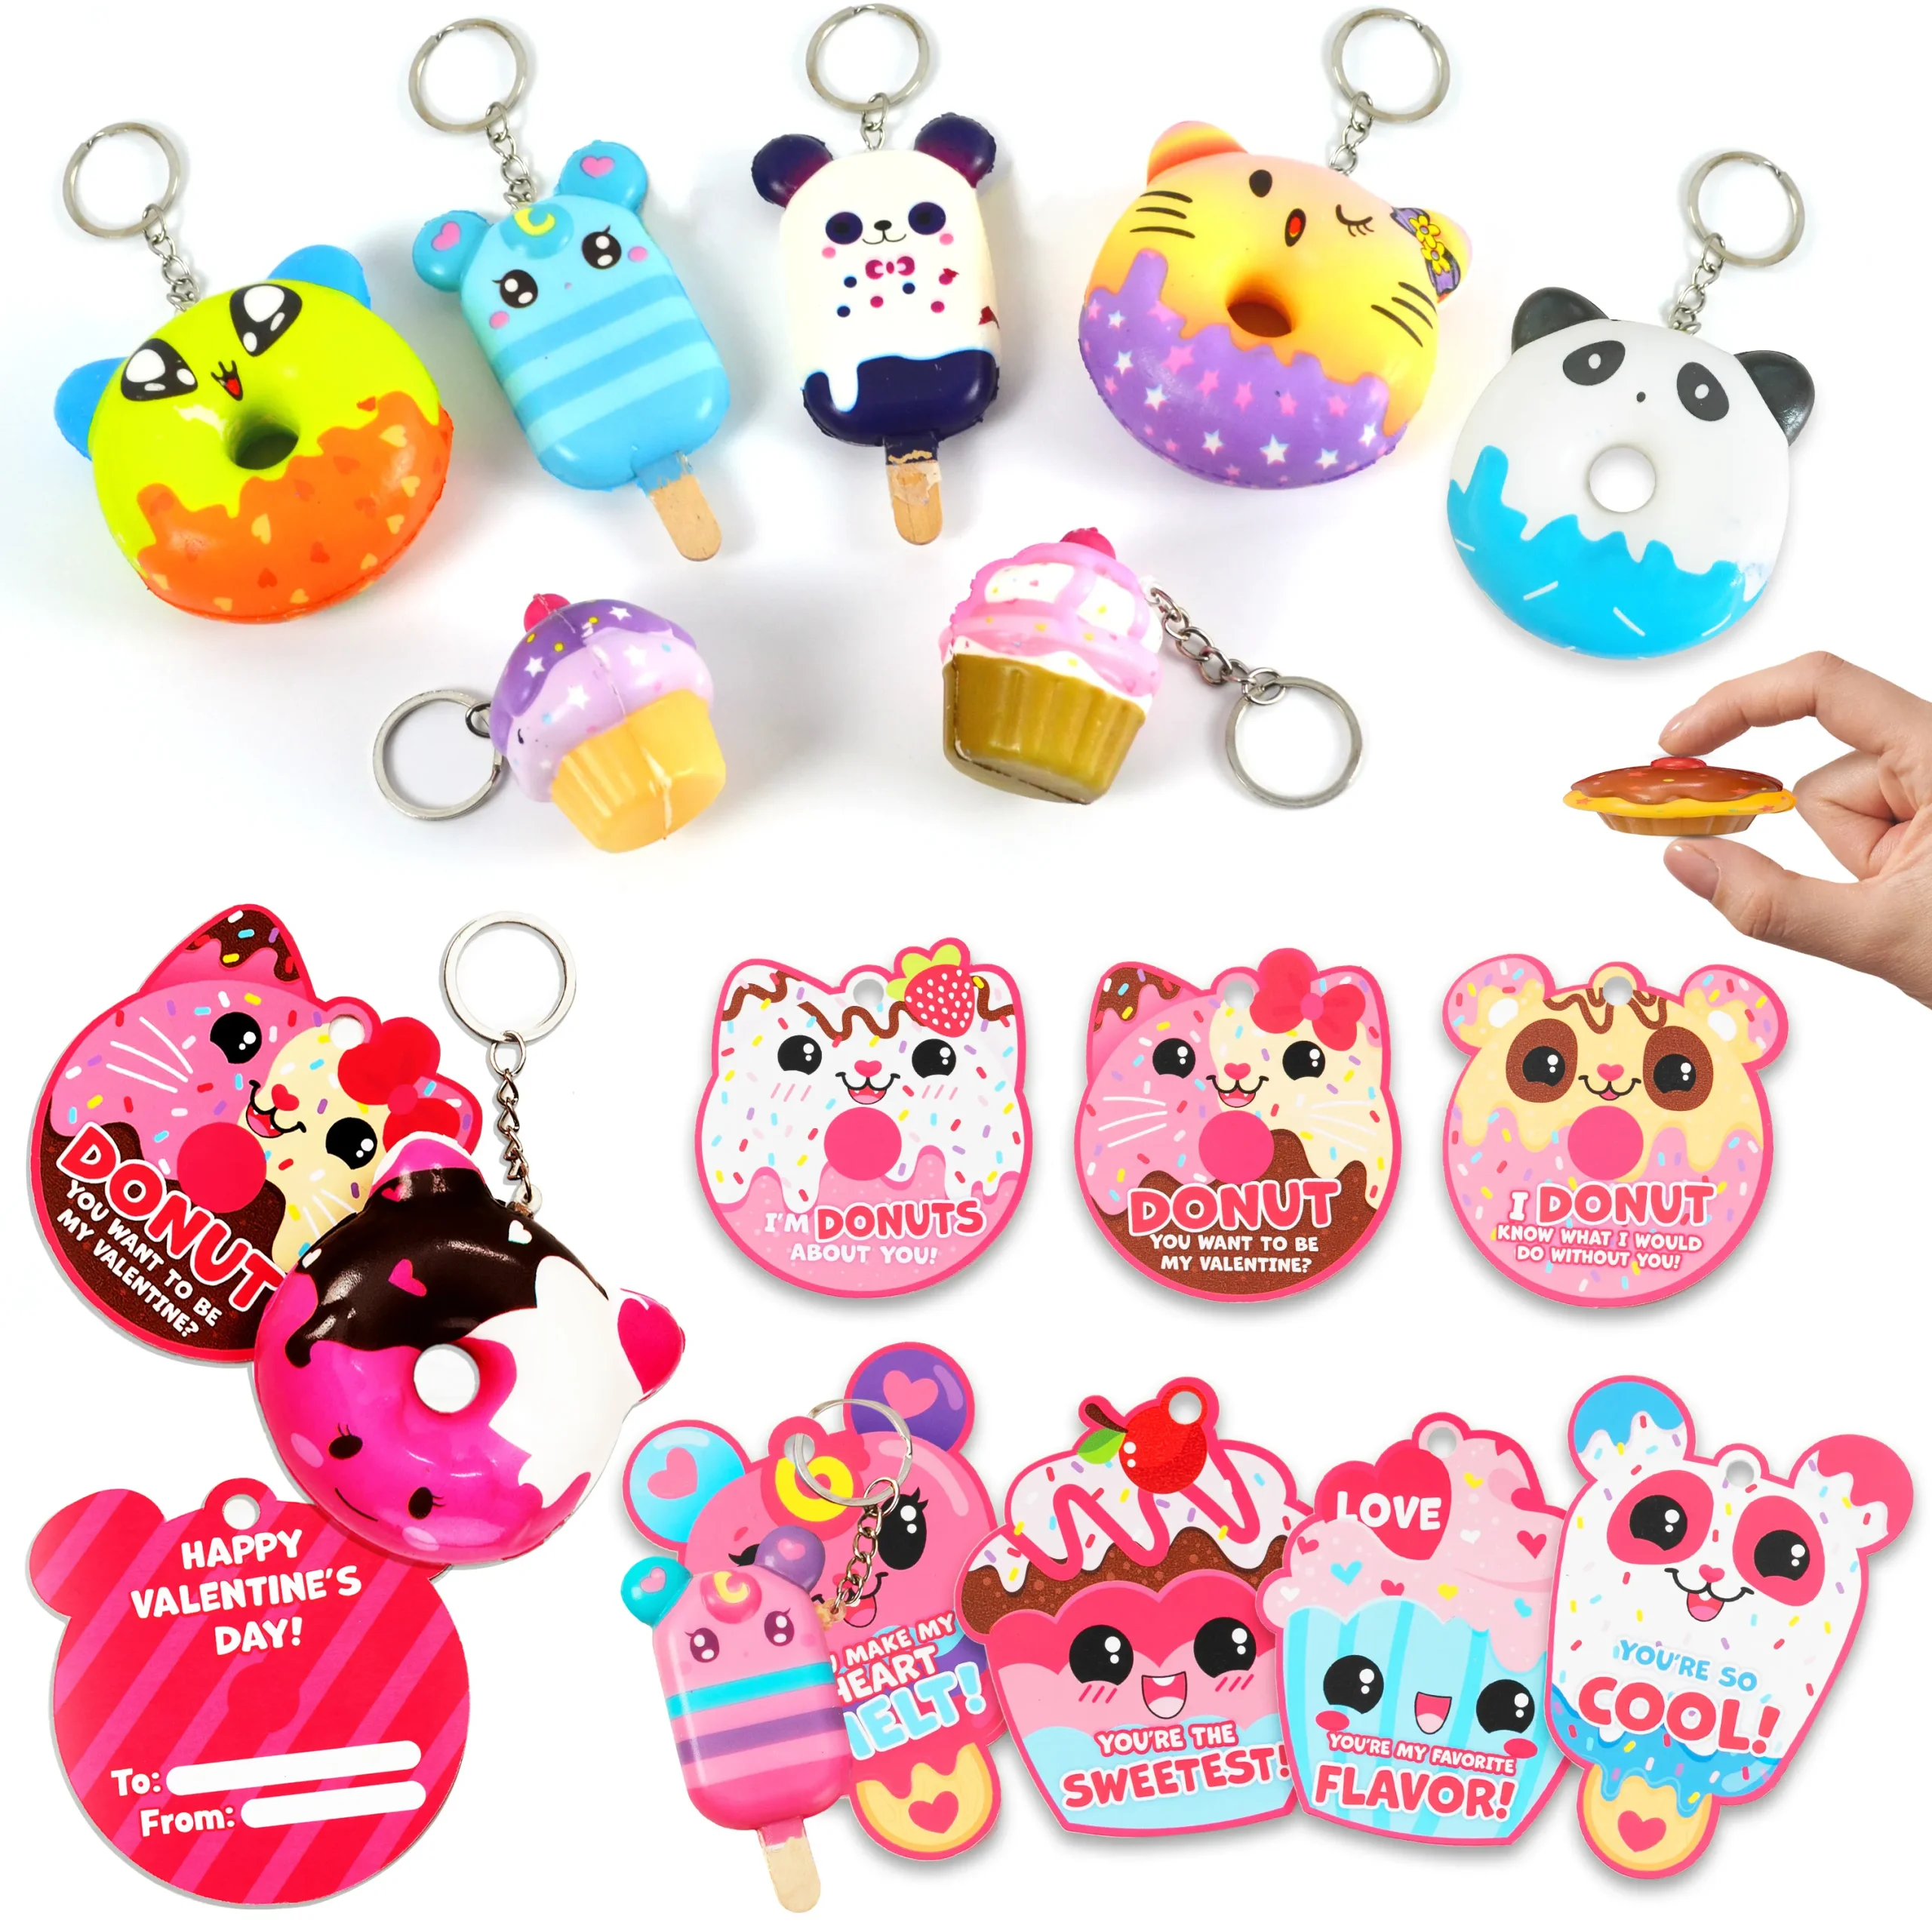 JOYIN 28 Packs Scented Dessert Squishy Toys Stress Relief Keychains with Cards for Classroom Exchange Prizes, Valentine?s Greeting Cards, Valentine